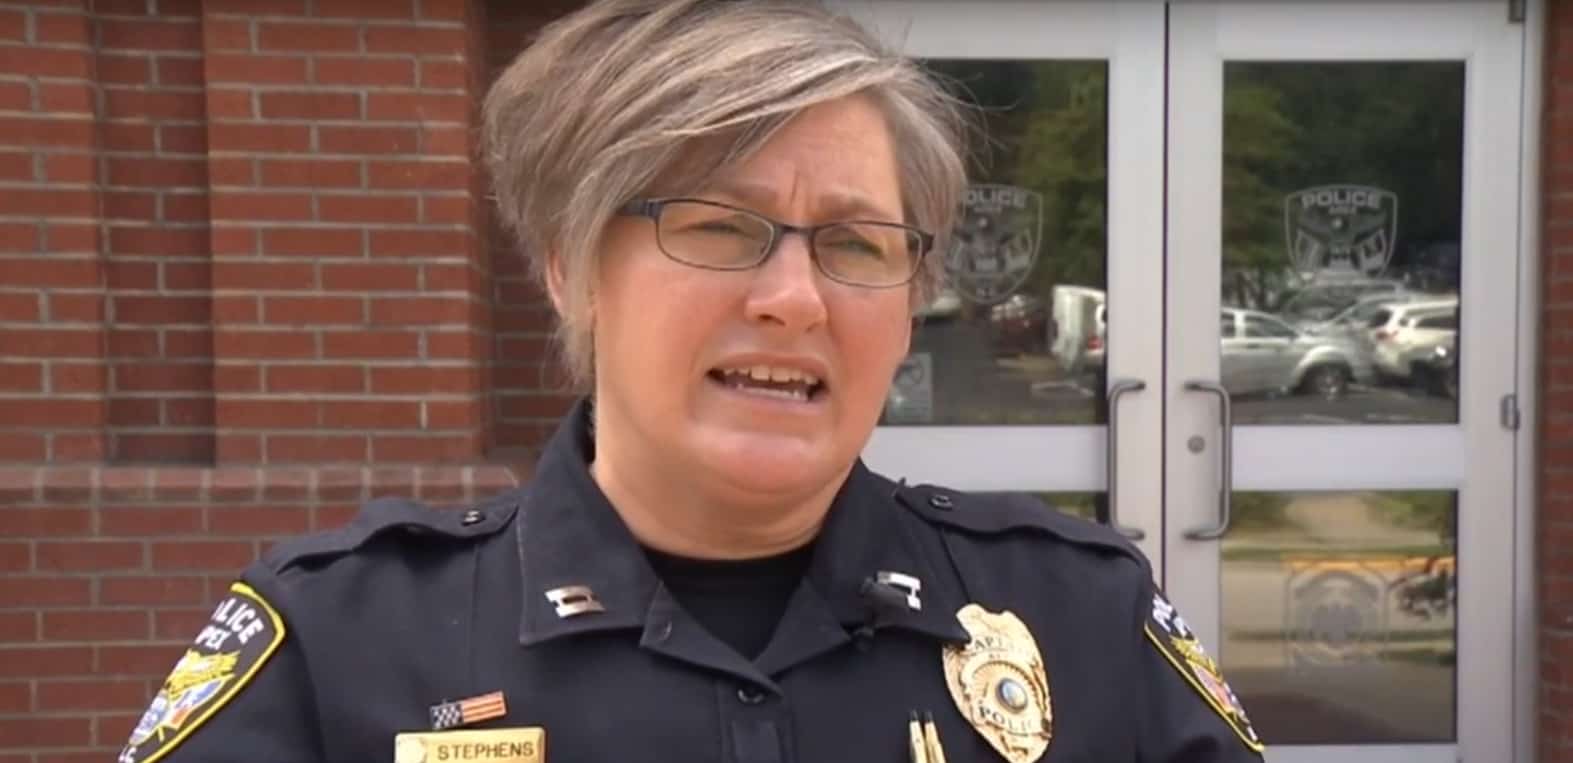 Police Captain Laughs As She Turns The Tables On A Scam Call